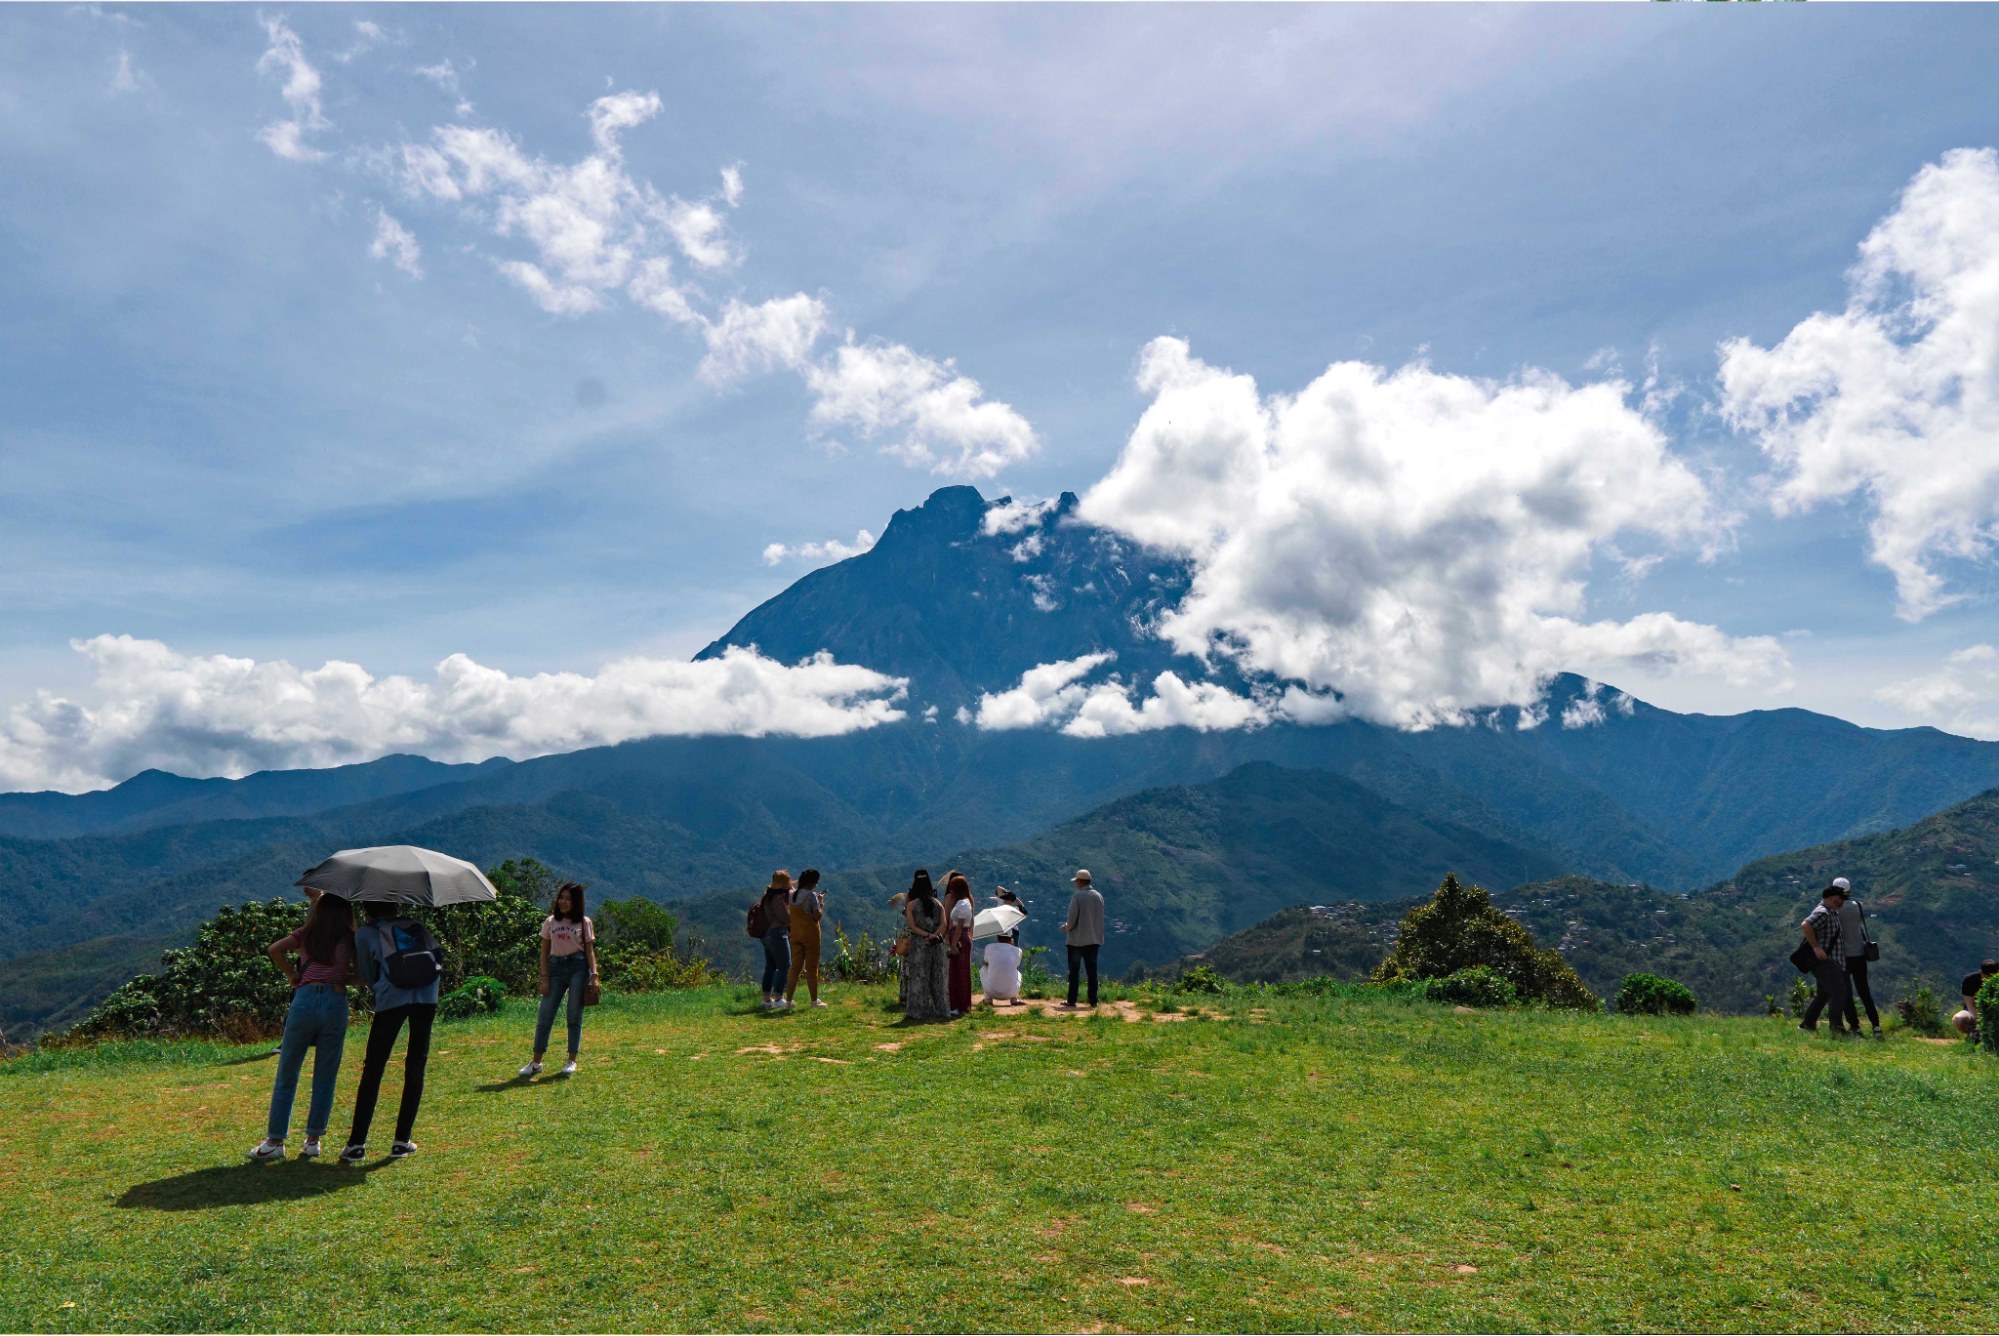 Travellers viewing Mount Kinabalu, an iconic tourist attraction in Sabah